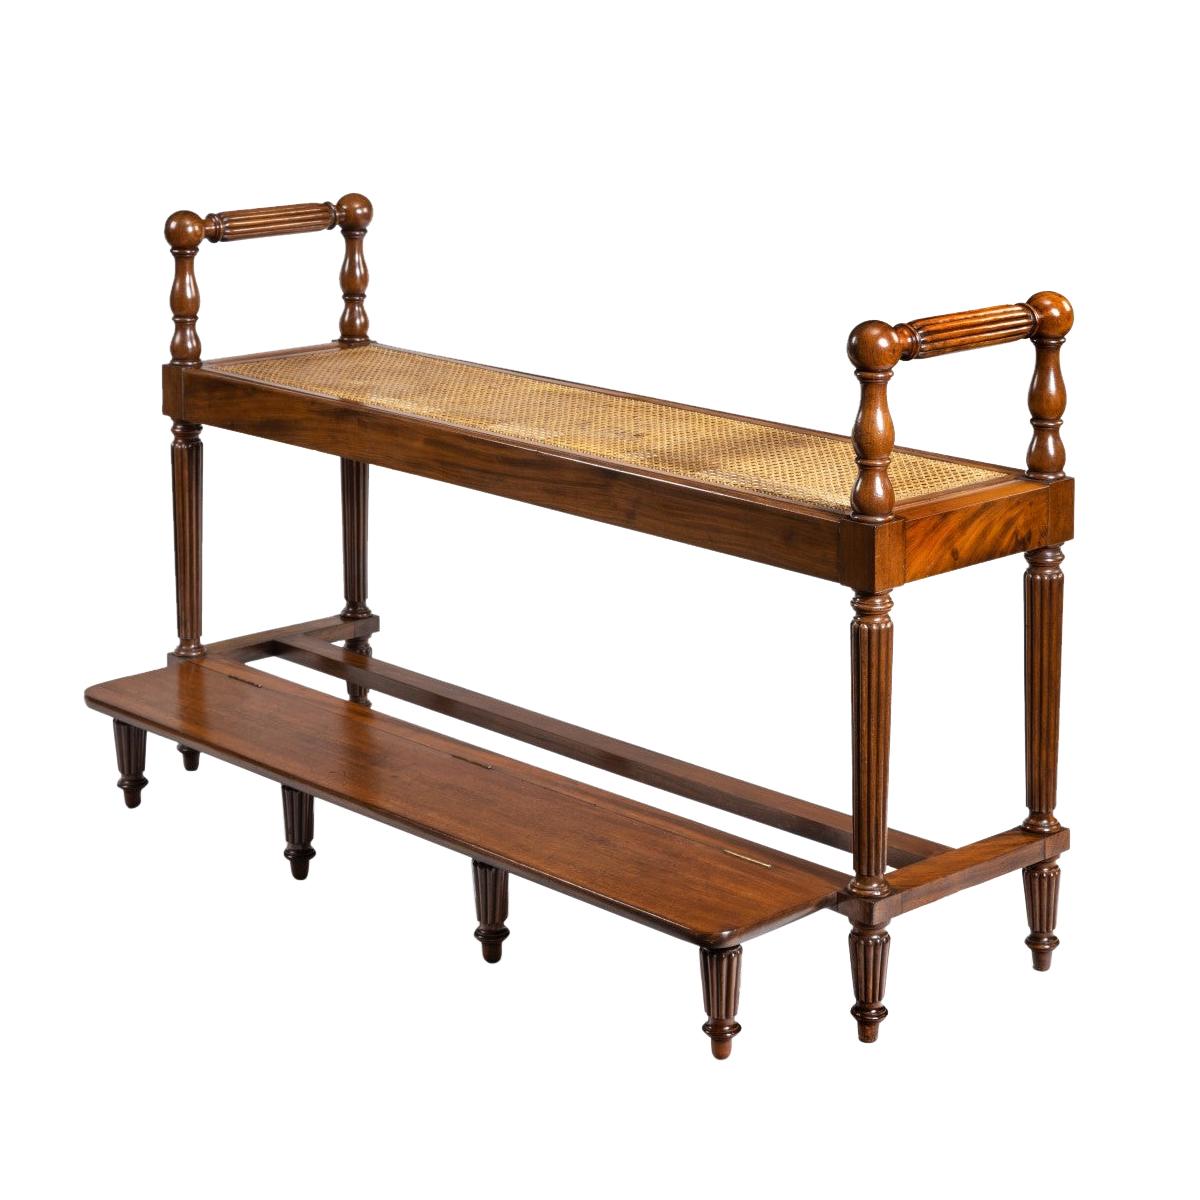 Louis Philippe Mahogany Hall Bench with a Folding Foot-Rest